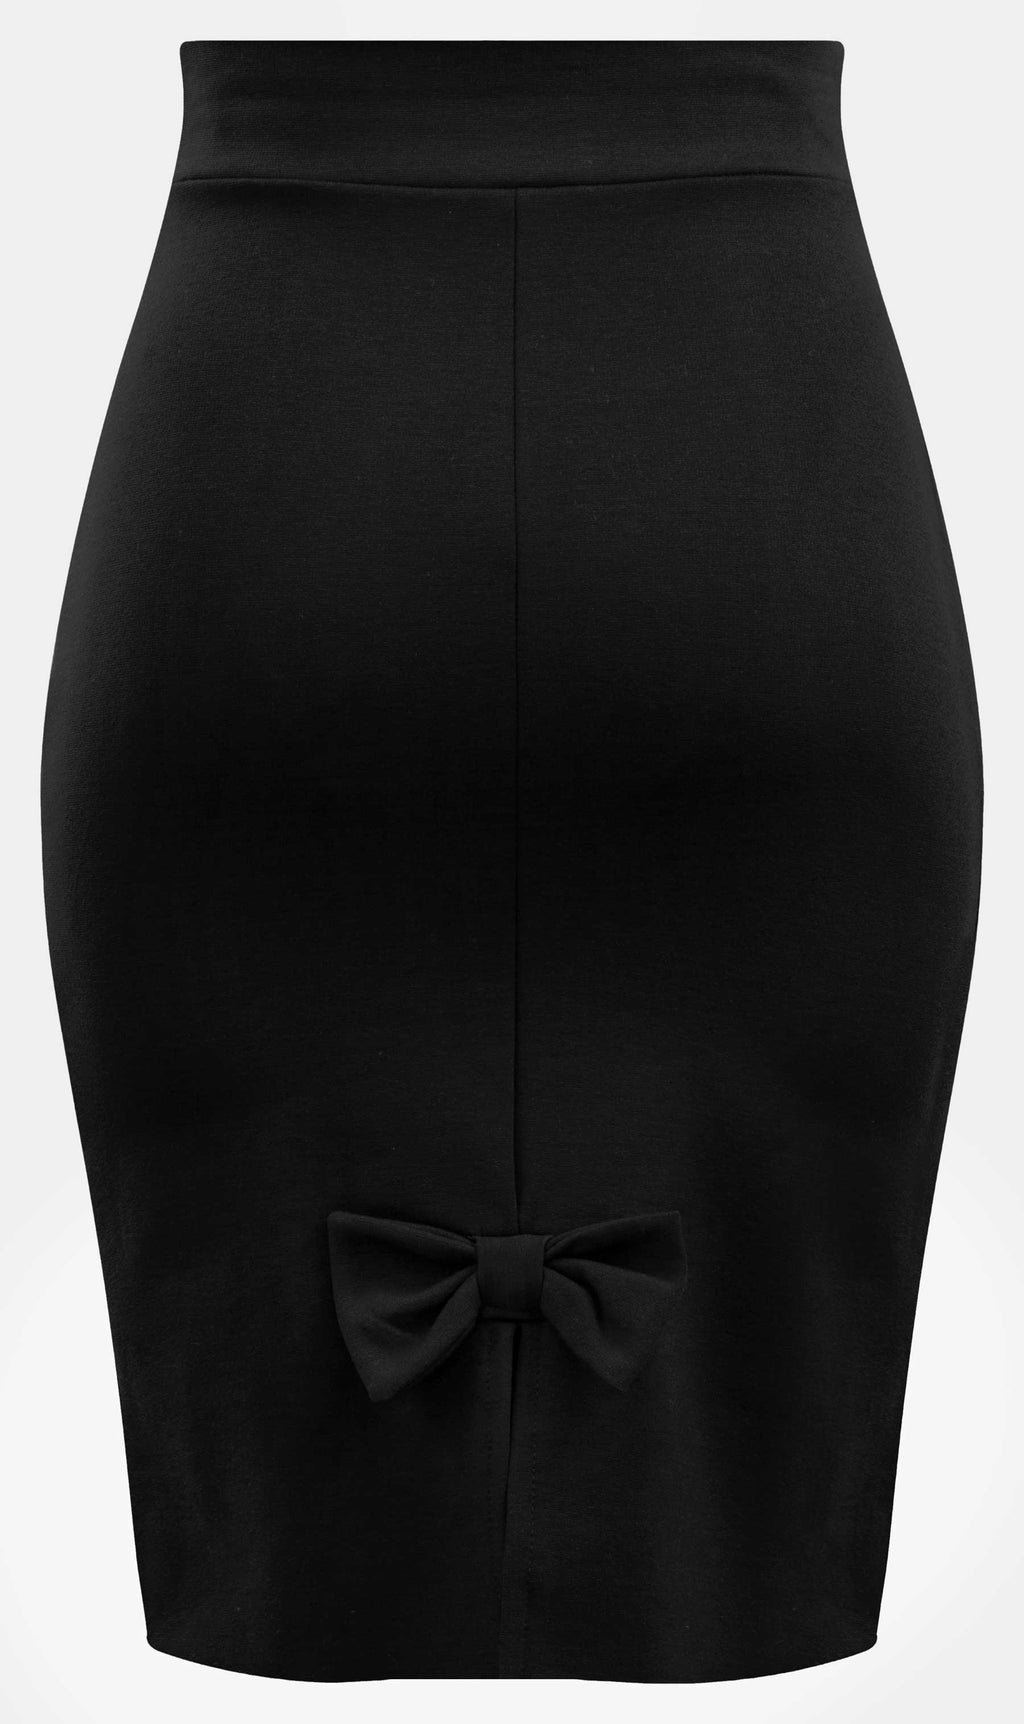 Bow Back Pencil Skirt in Black